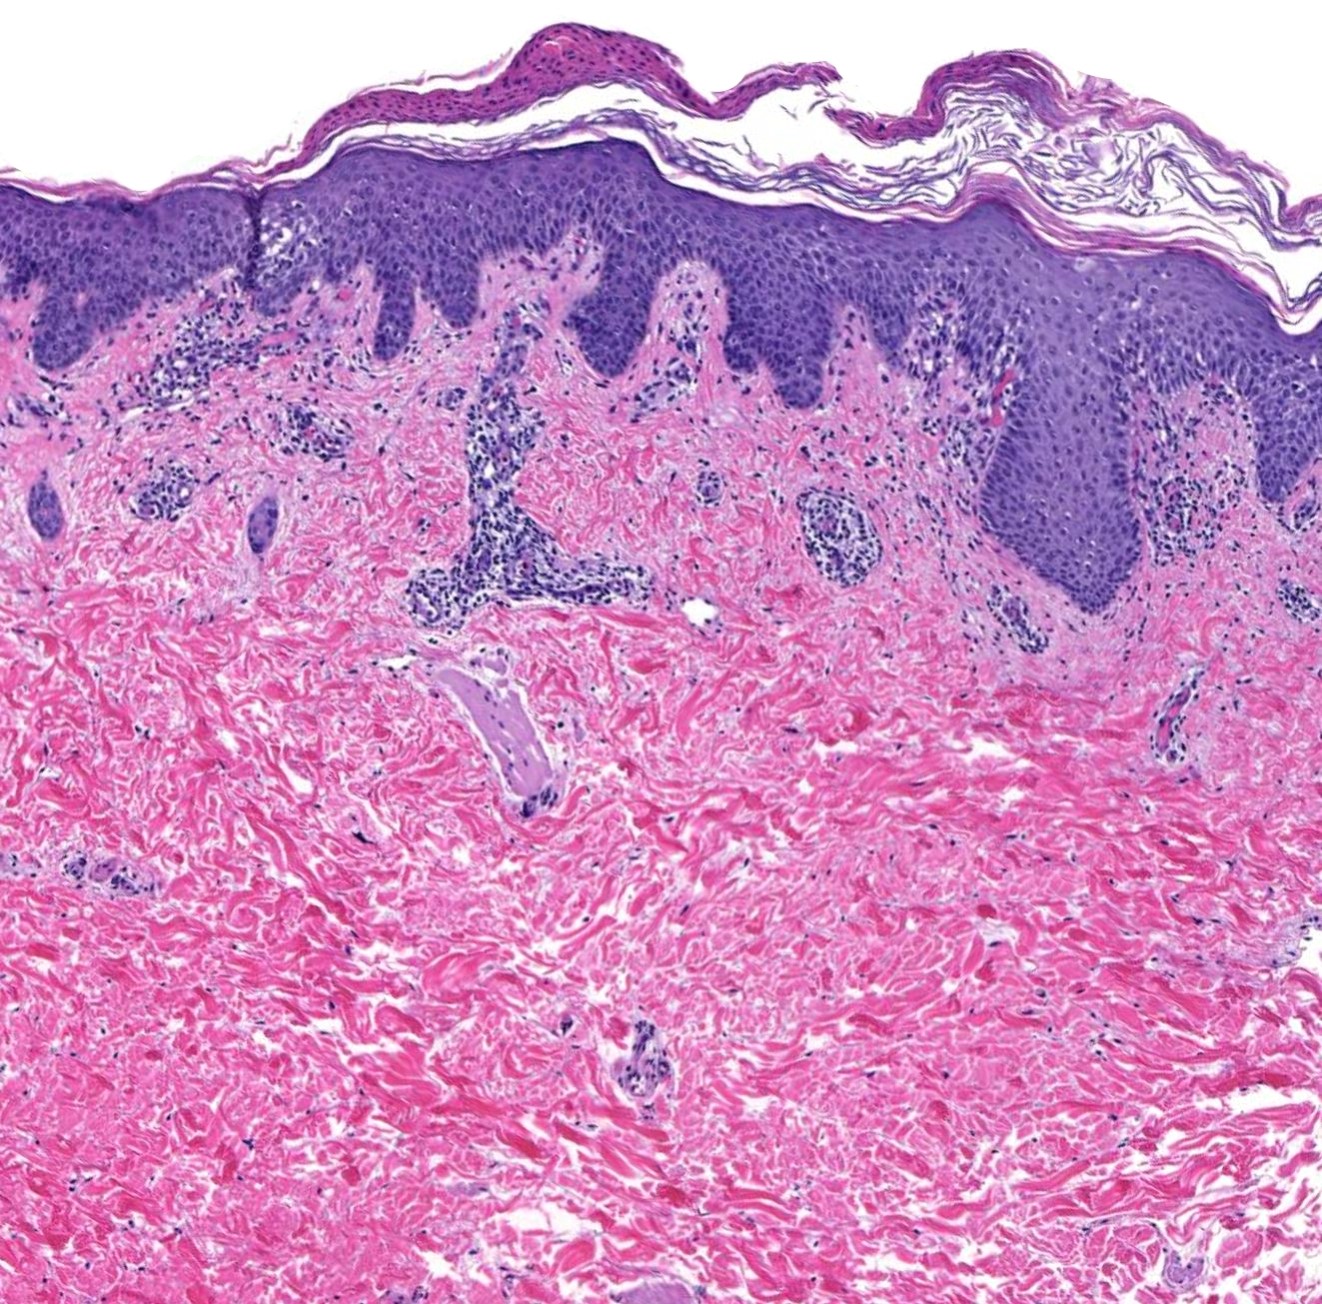 Spongiosis with mounds of parakeratosis